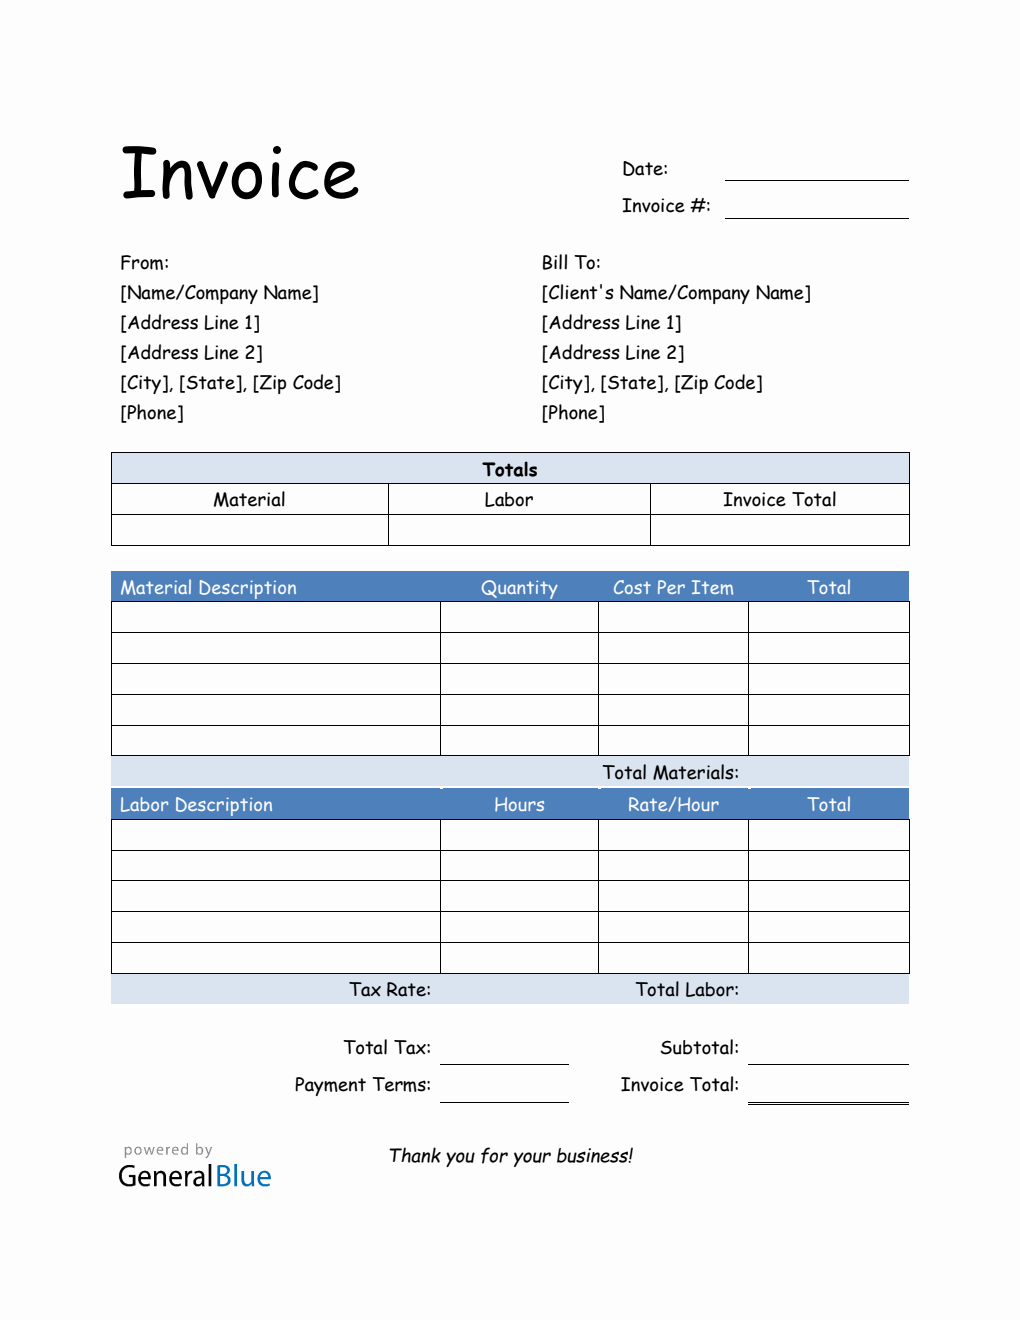 Parts and Labor Invoice in Word (Blue)